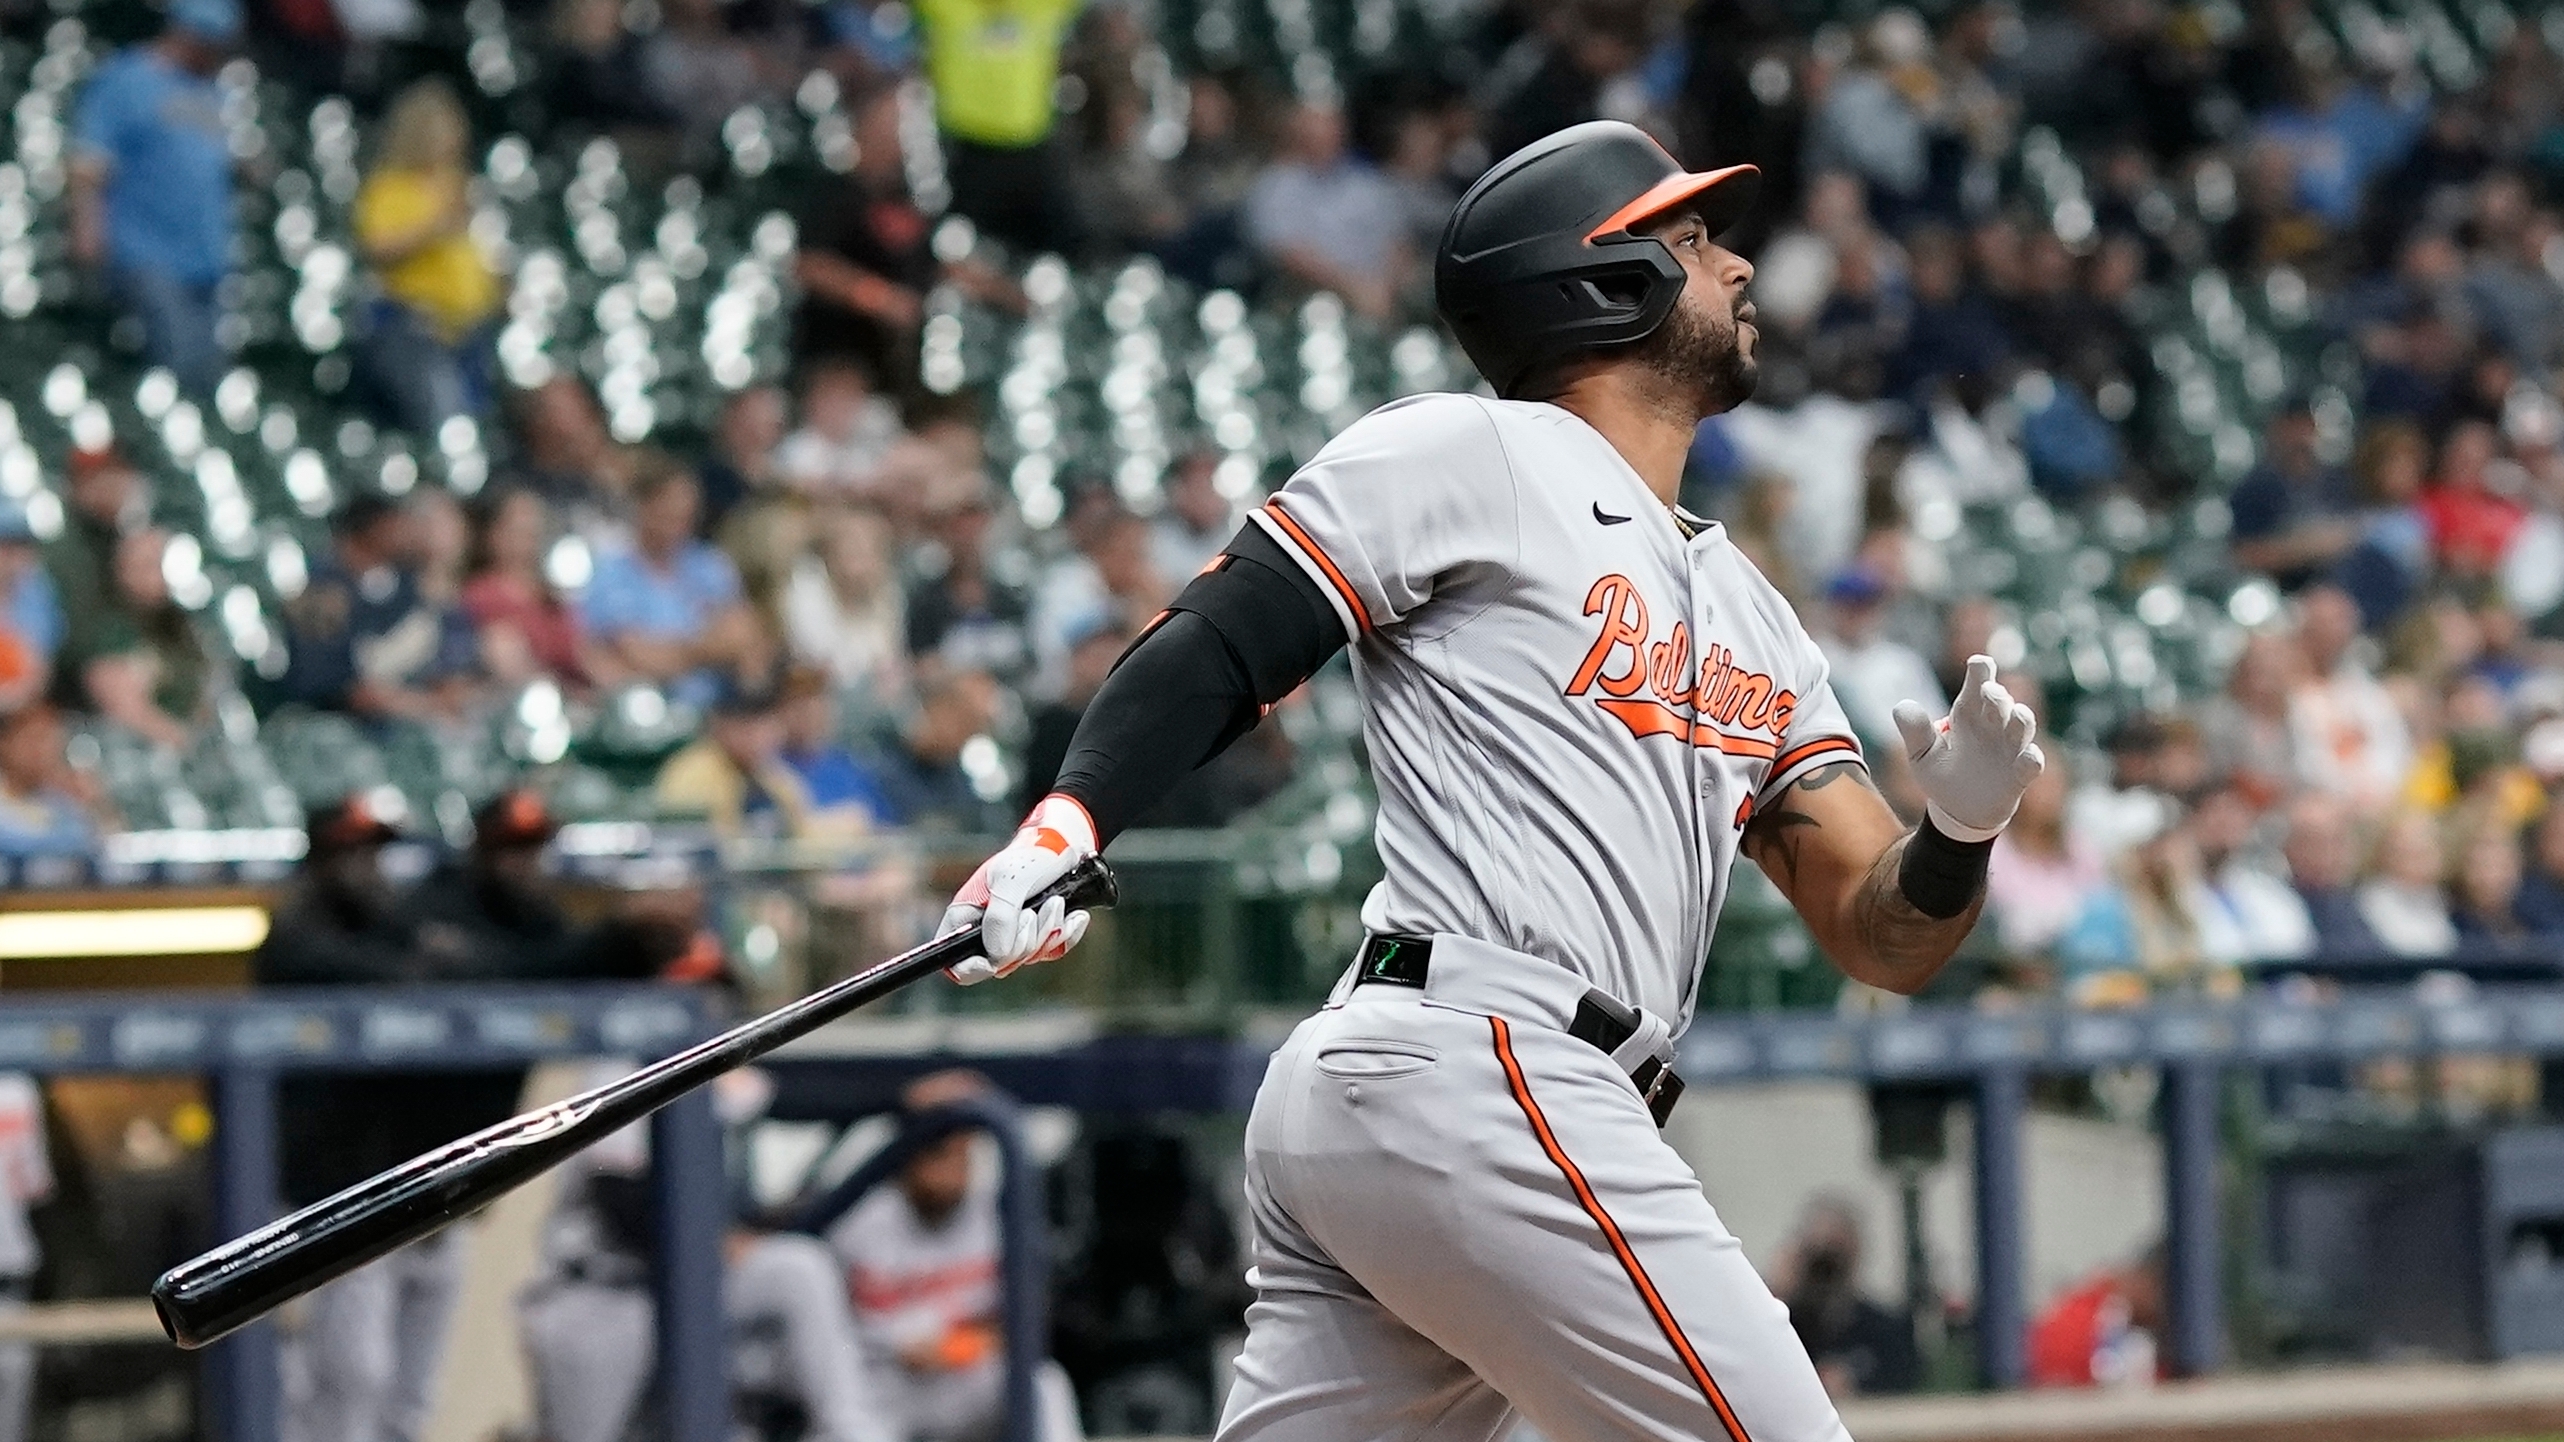 Hicks, O'Hearn continue to shine filling in for Orioles